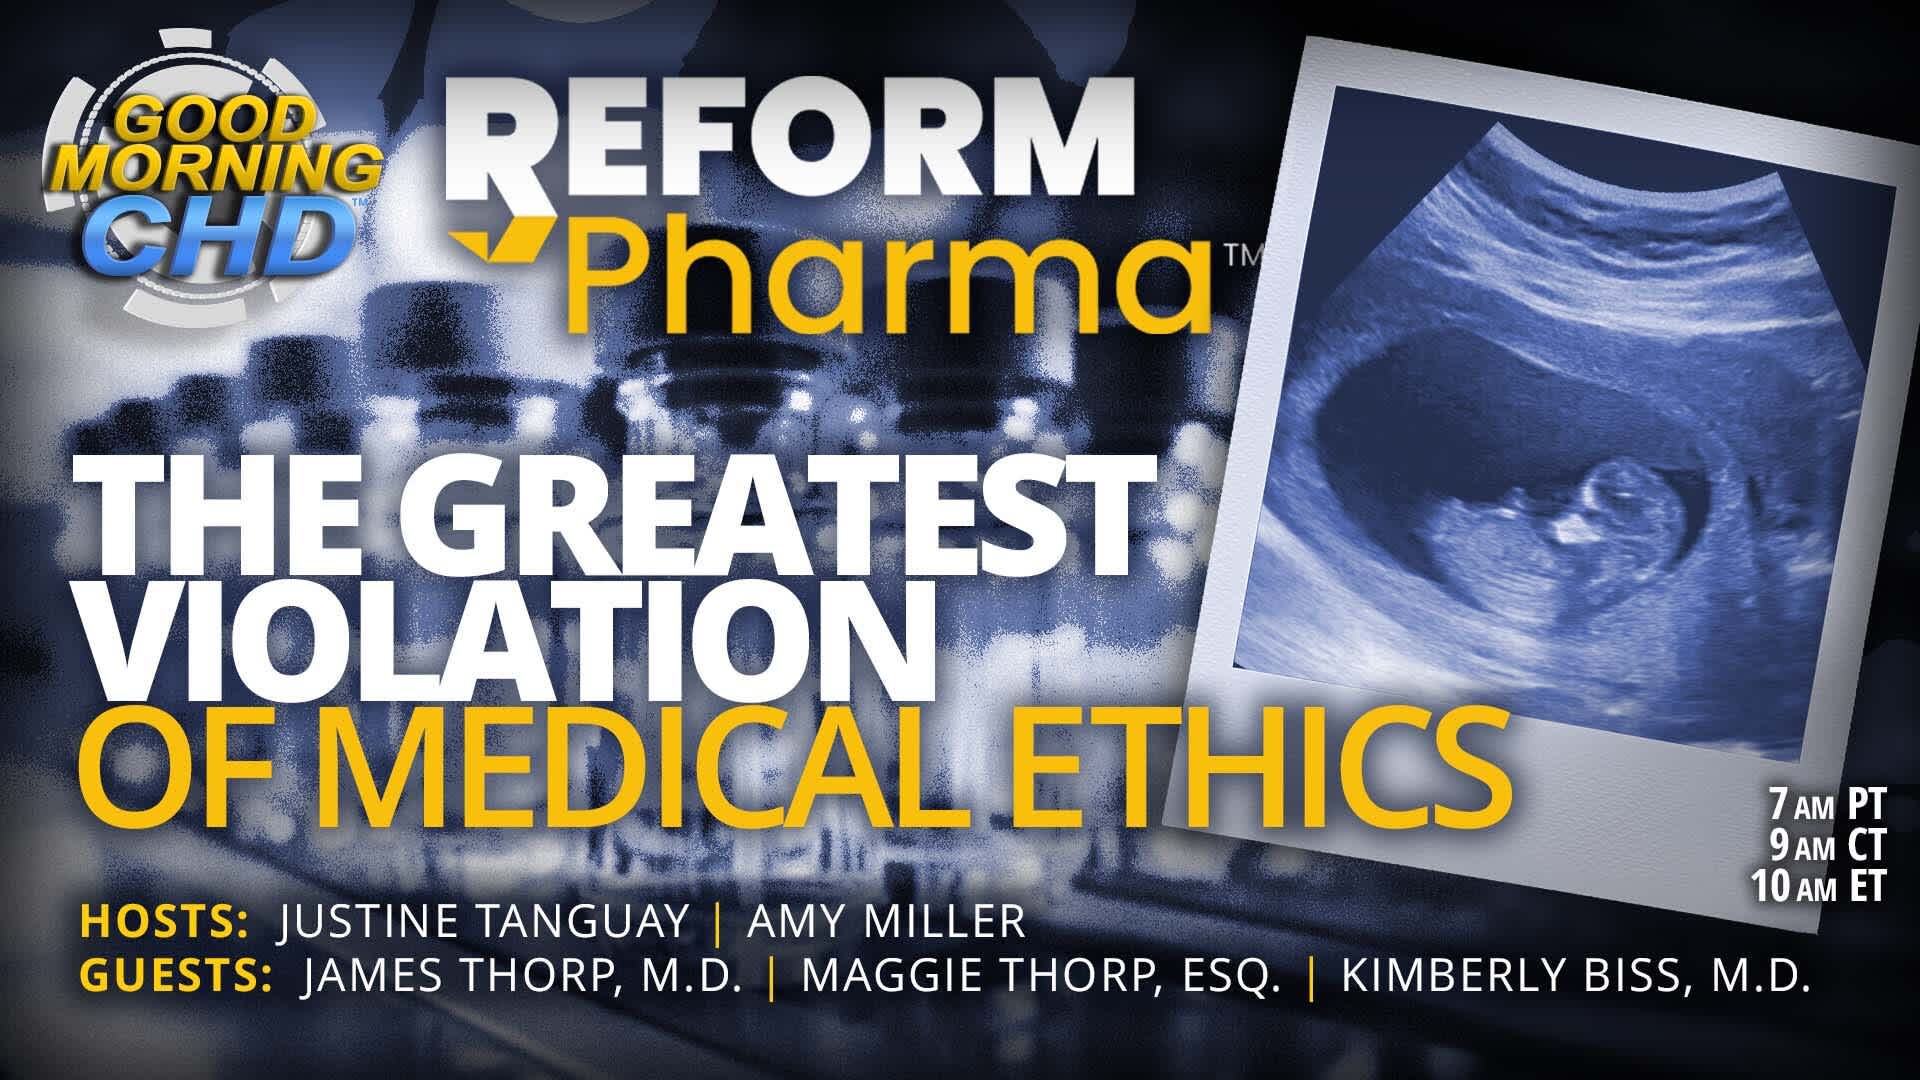 The Greatest Violation of Medical Ethics